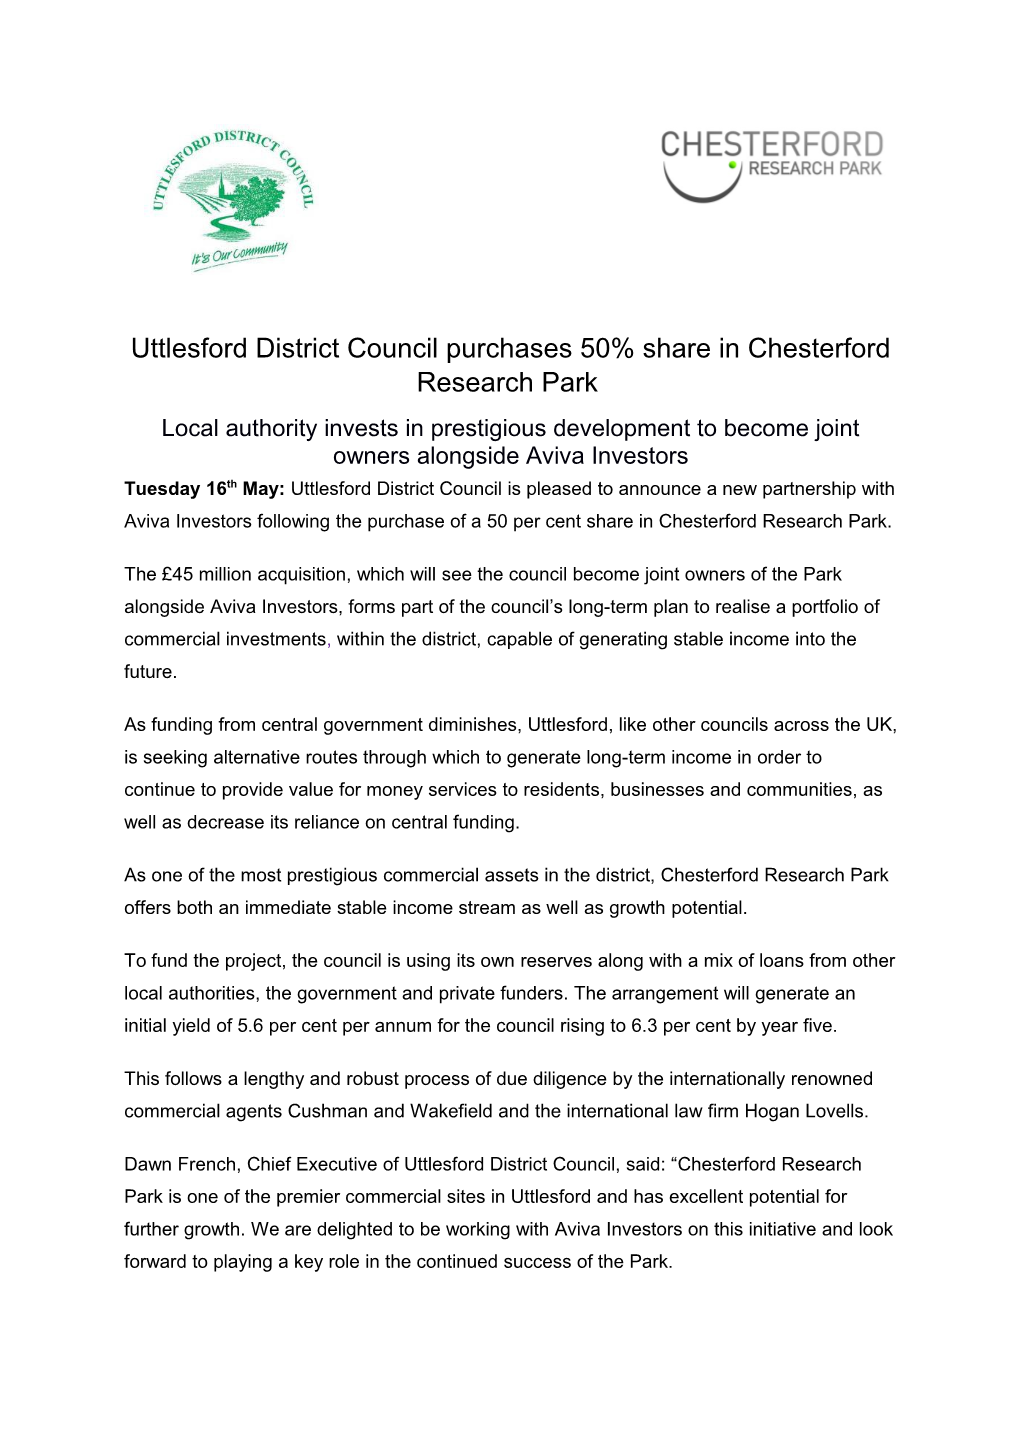 Uttlesford District Council Purchases 50% Share in Chesterford Research Park